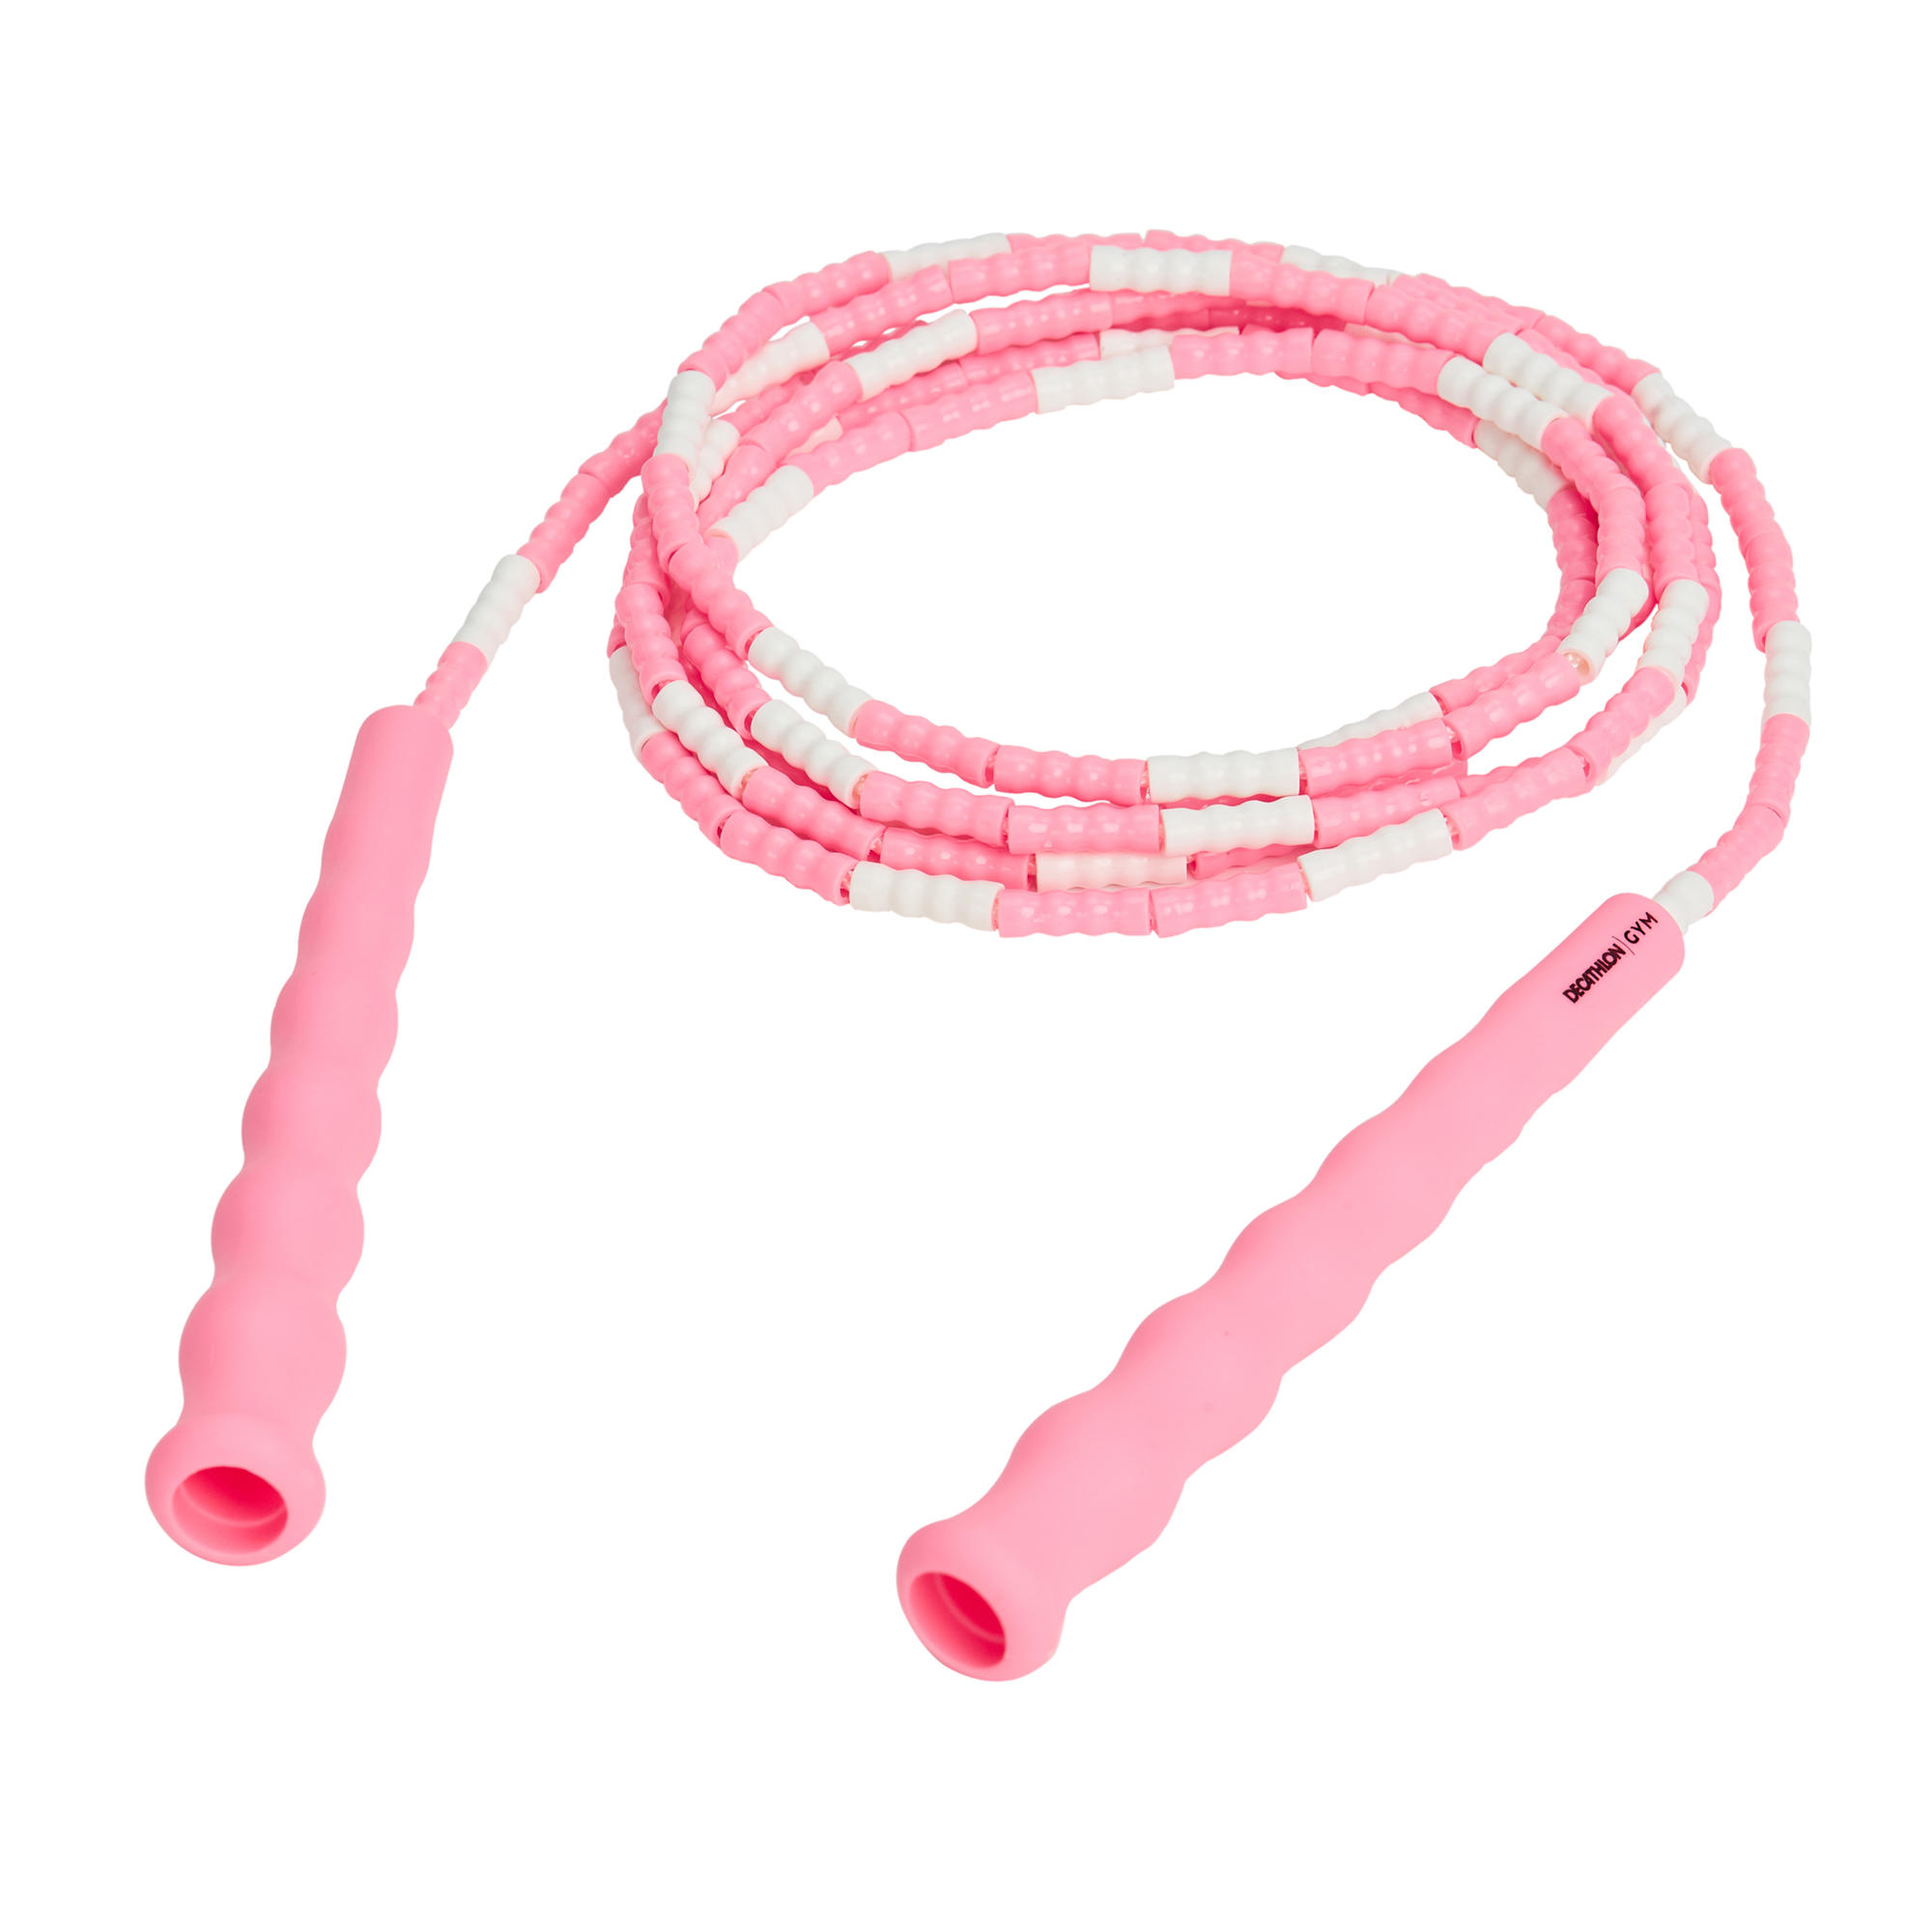 Tangle-Free Segmented Fitness Jumping Rope-for Keeping fit & Active Fun 8.5 ft SPOPIRIT Jump Rope for Kids- Soft Beaded Jump Skipping Rope-Adjustable Training 